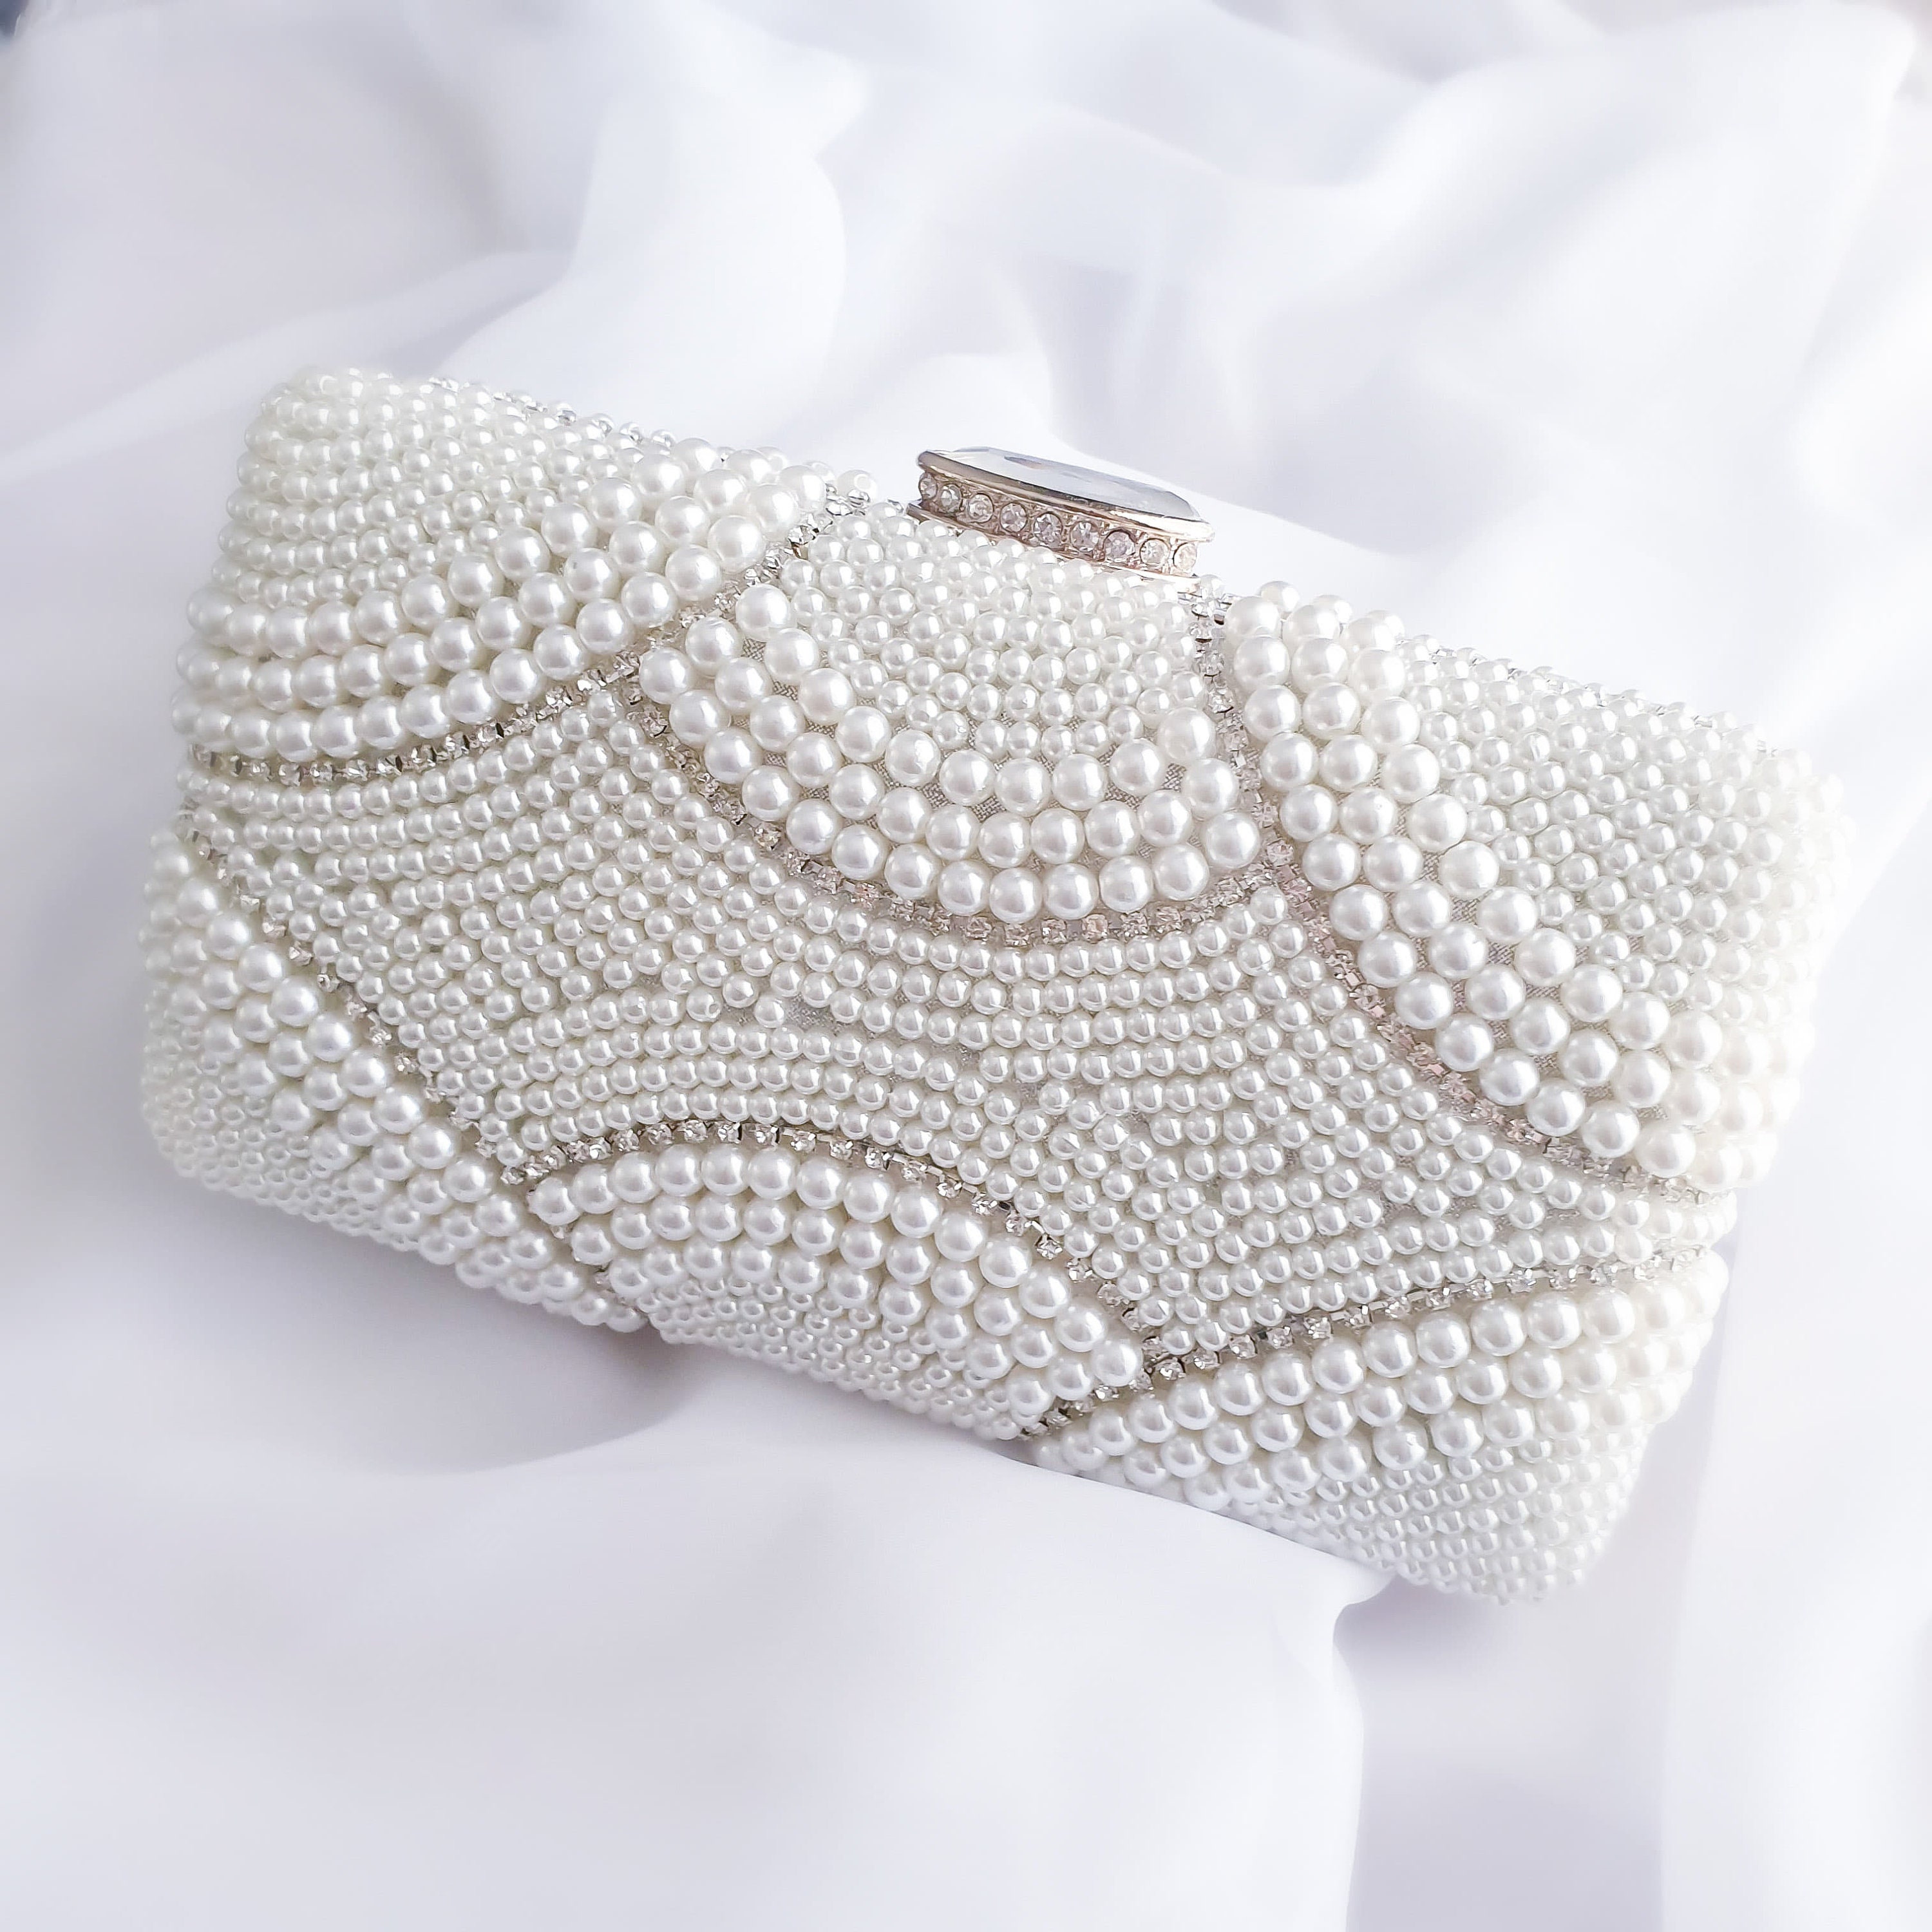 SKB Stylish & Fancy Evening Party Bridal Wedding Clutch Purse White &  Golden Online in India, Buy at Best Price from Firstcry.com - 13893423